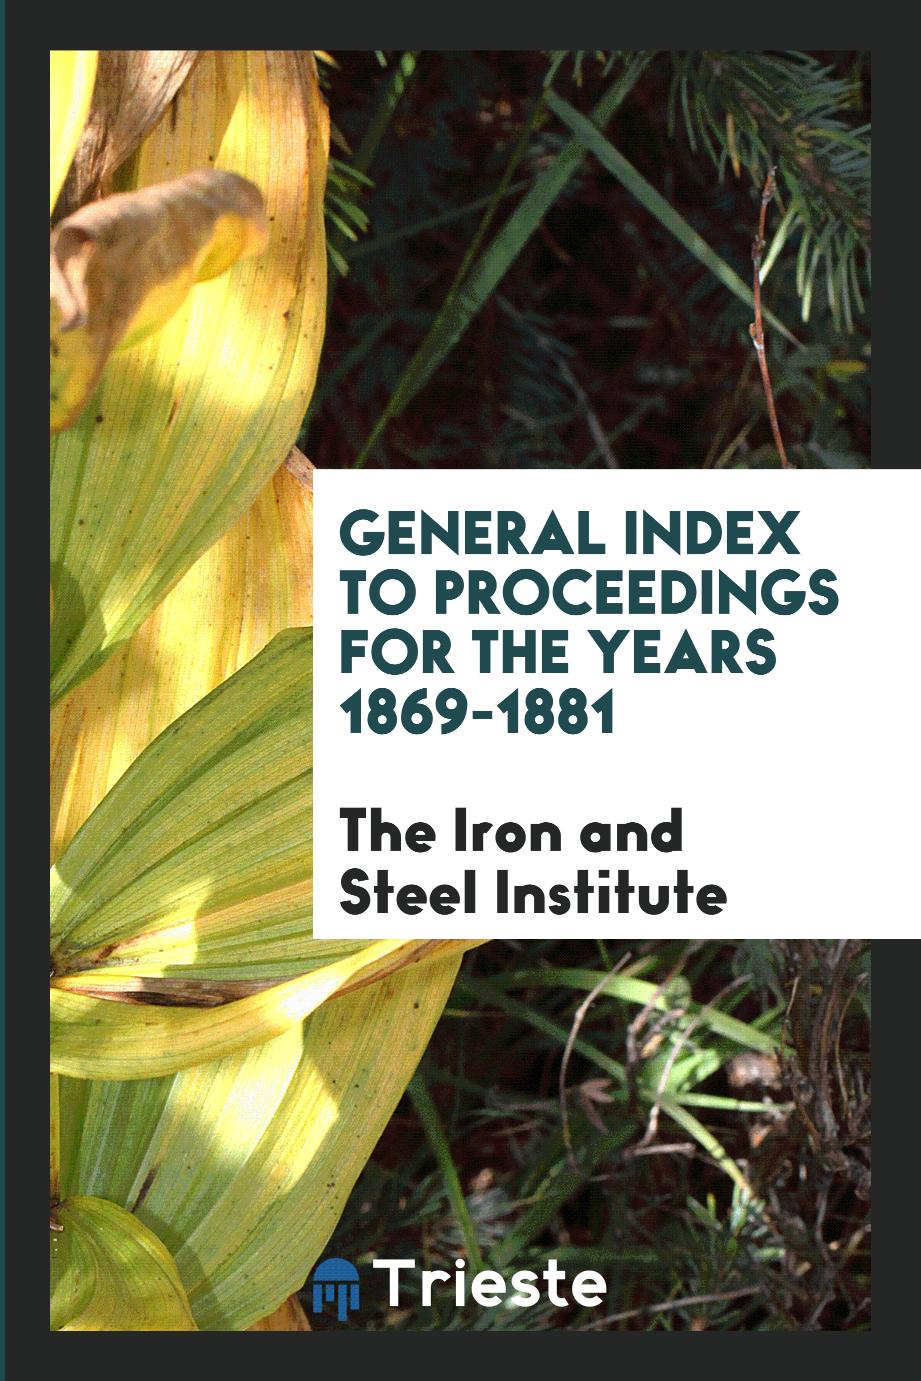 General Index to Proceedings for the Years 1869-1881